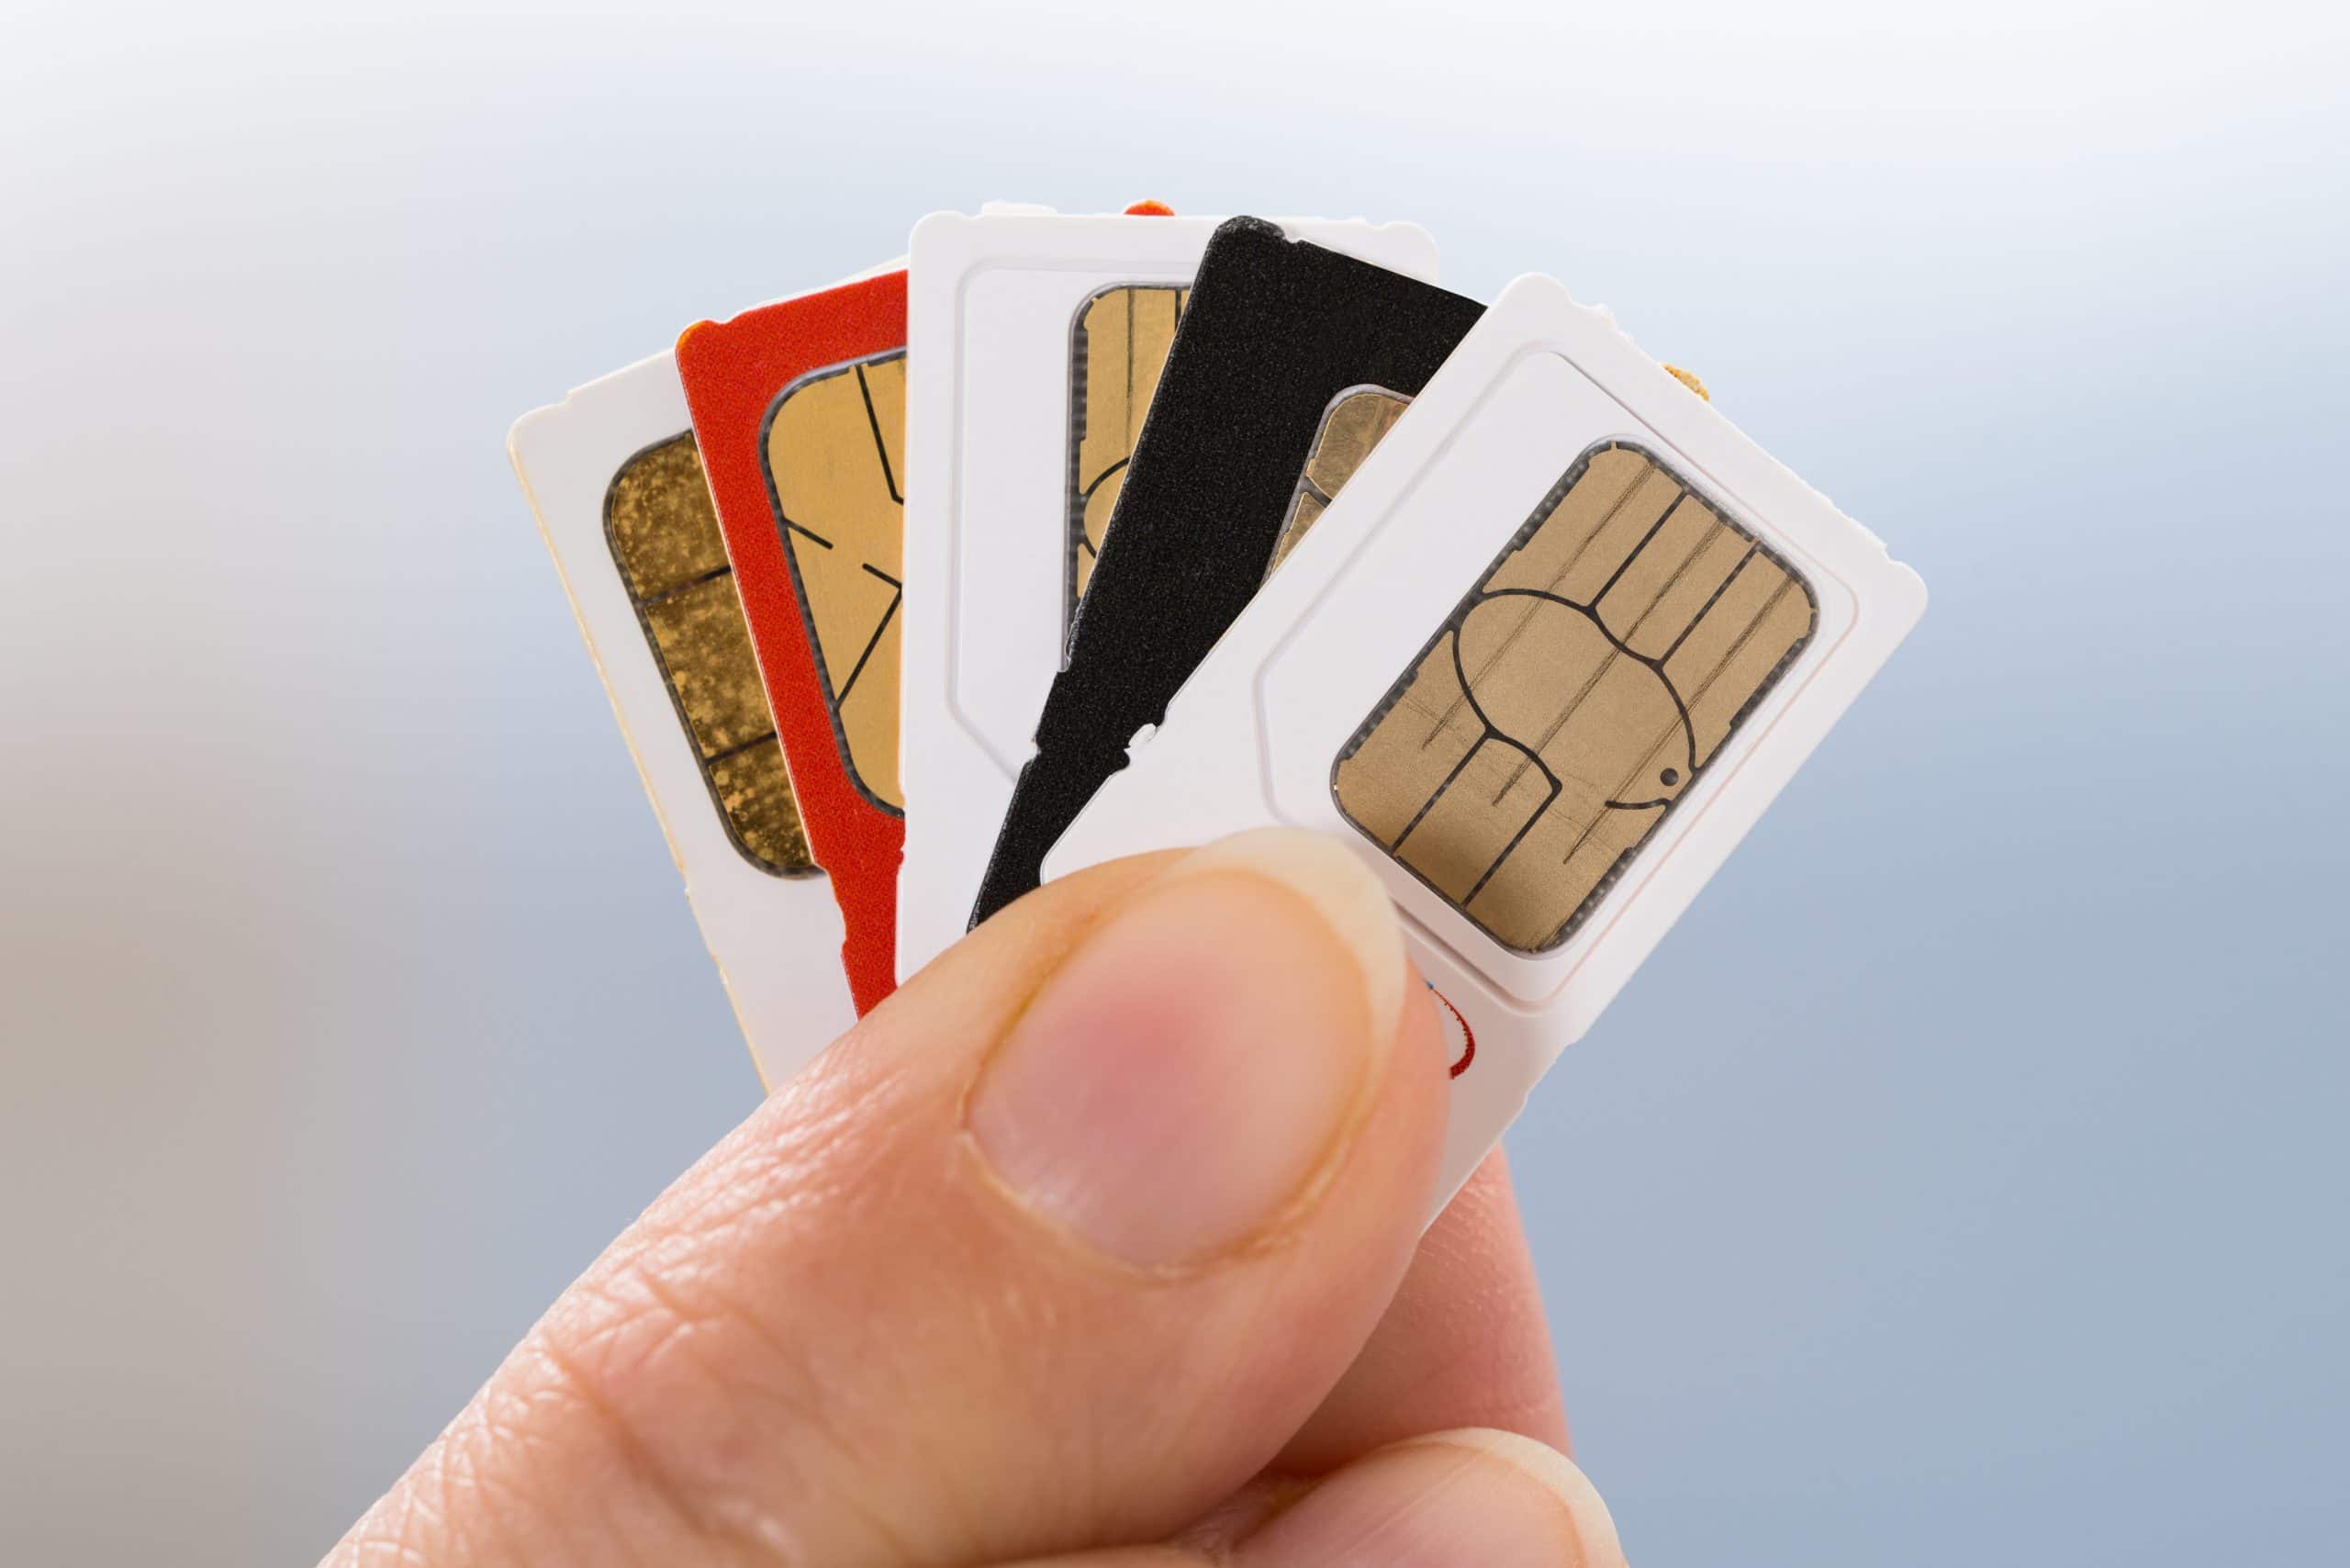 Review: Best International SIM Card for Travelers